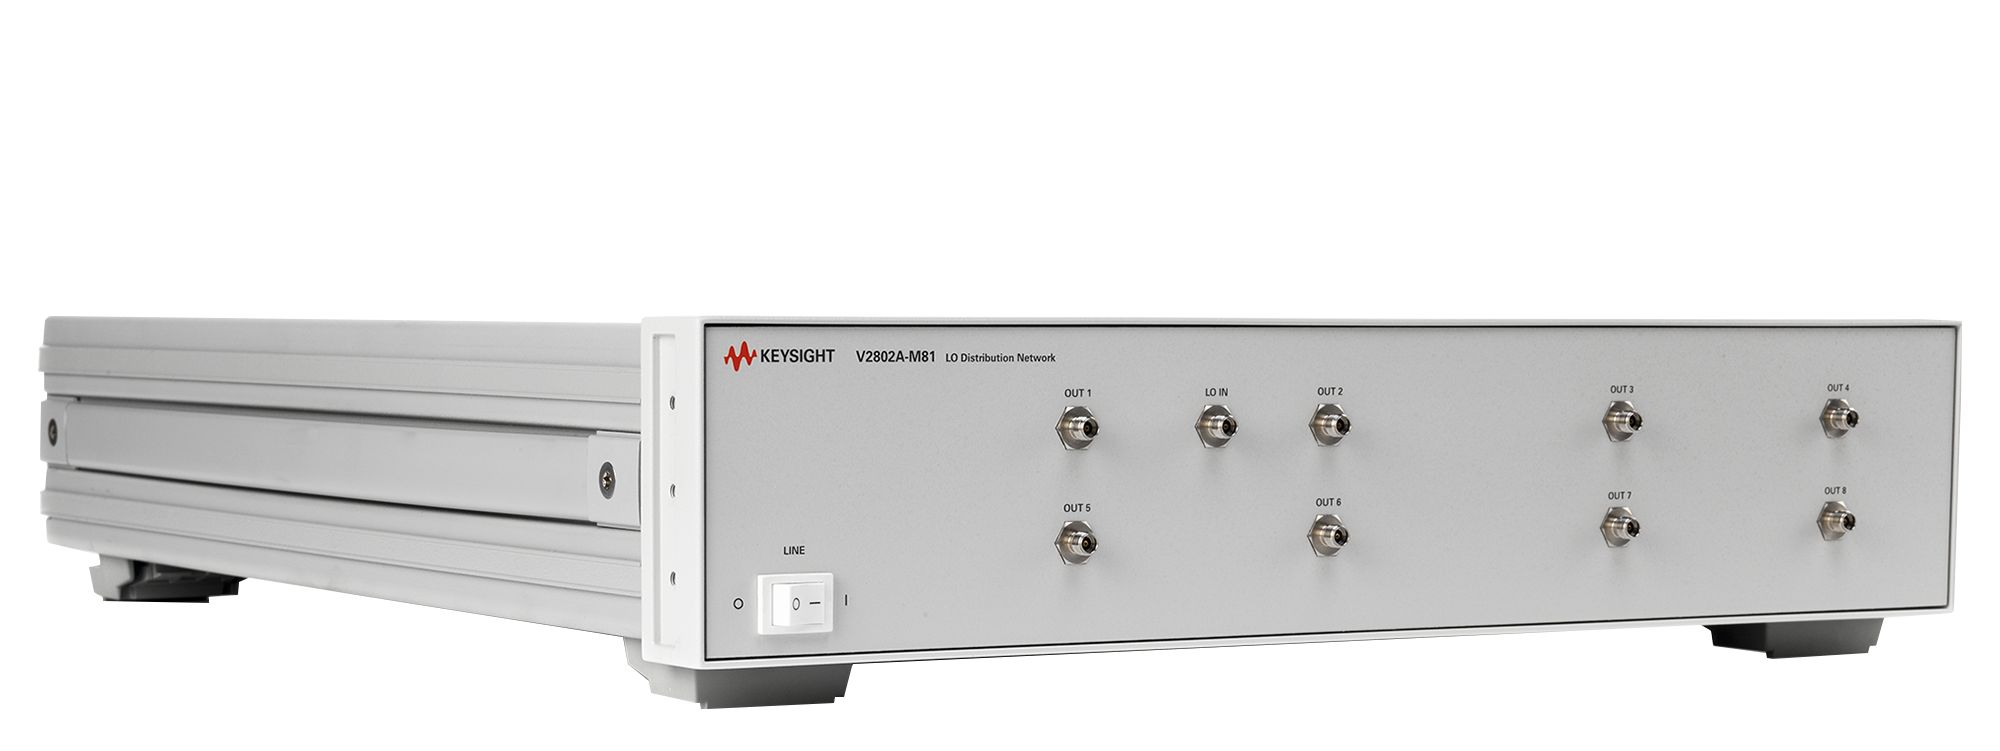 Picture of a Keysight Technologies V2802A